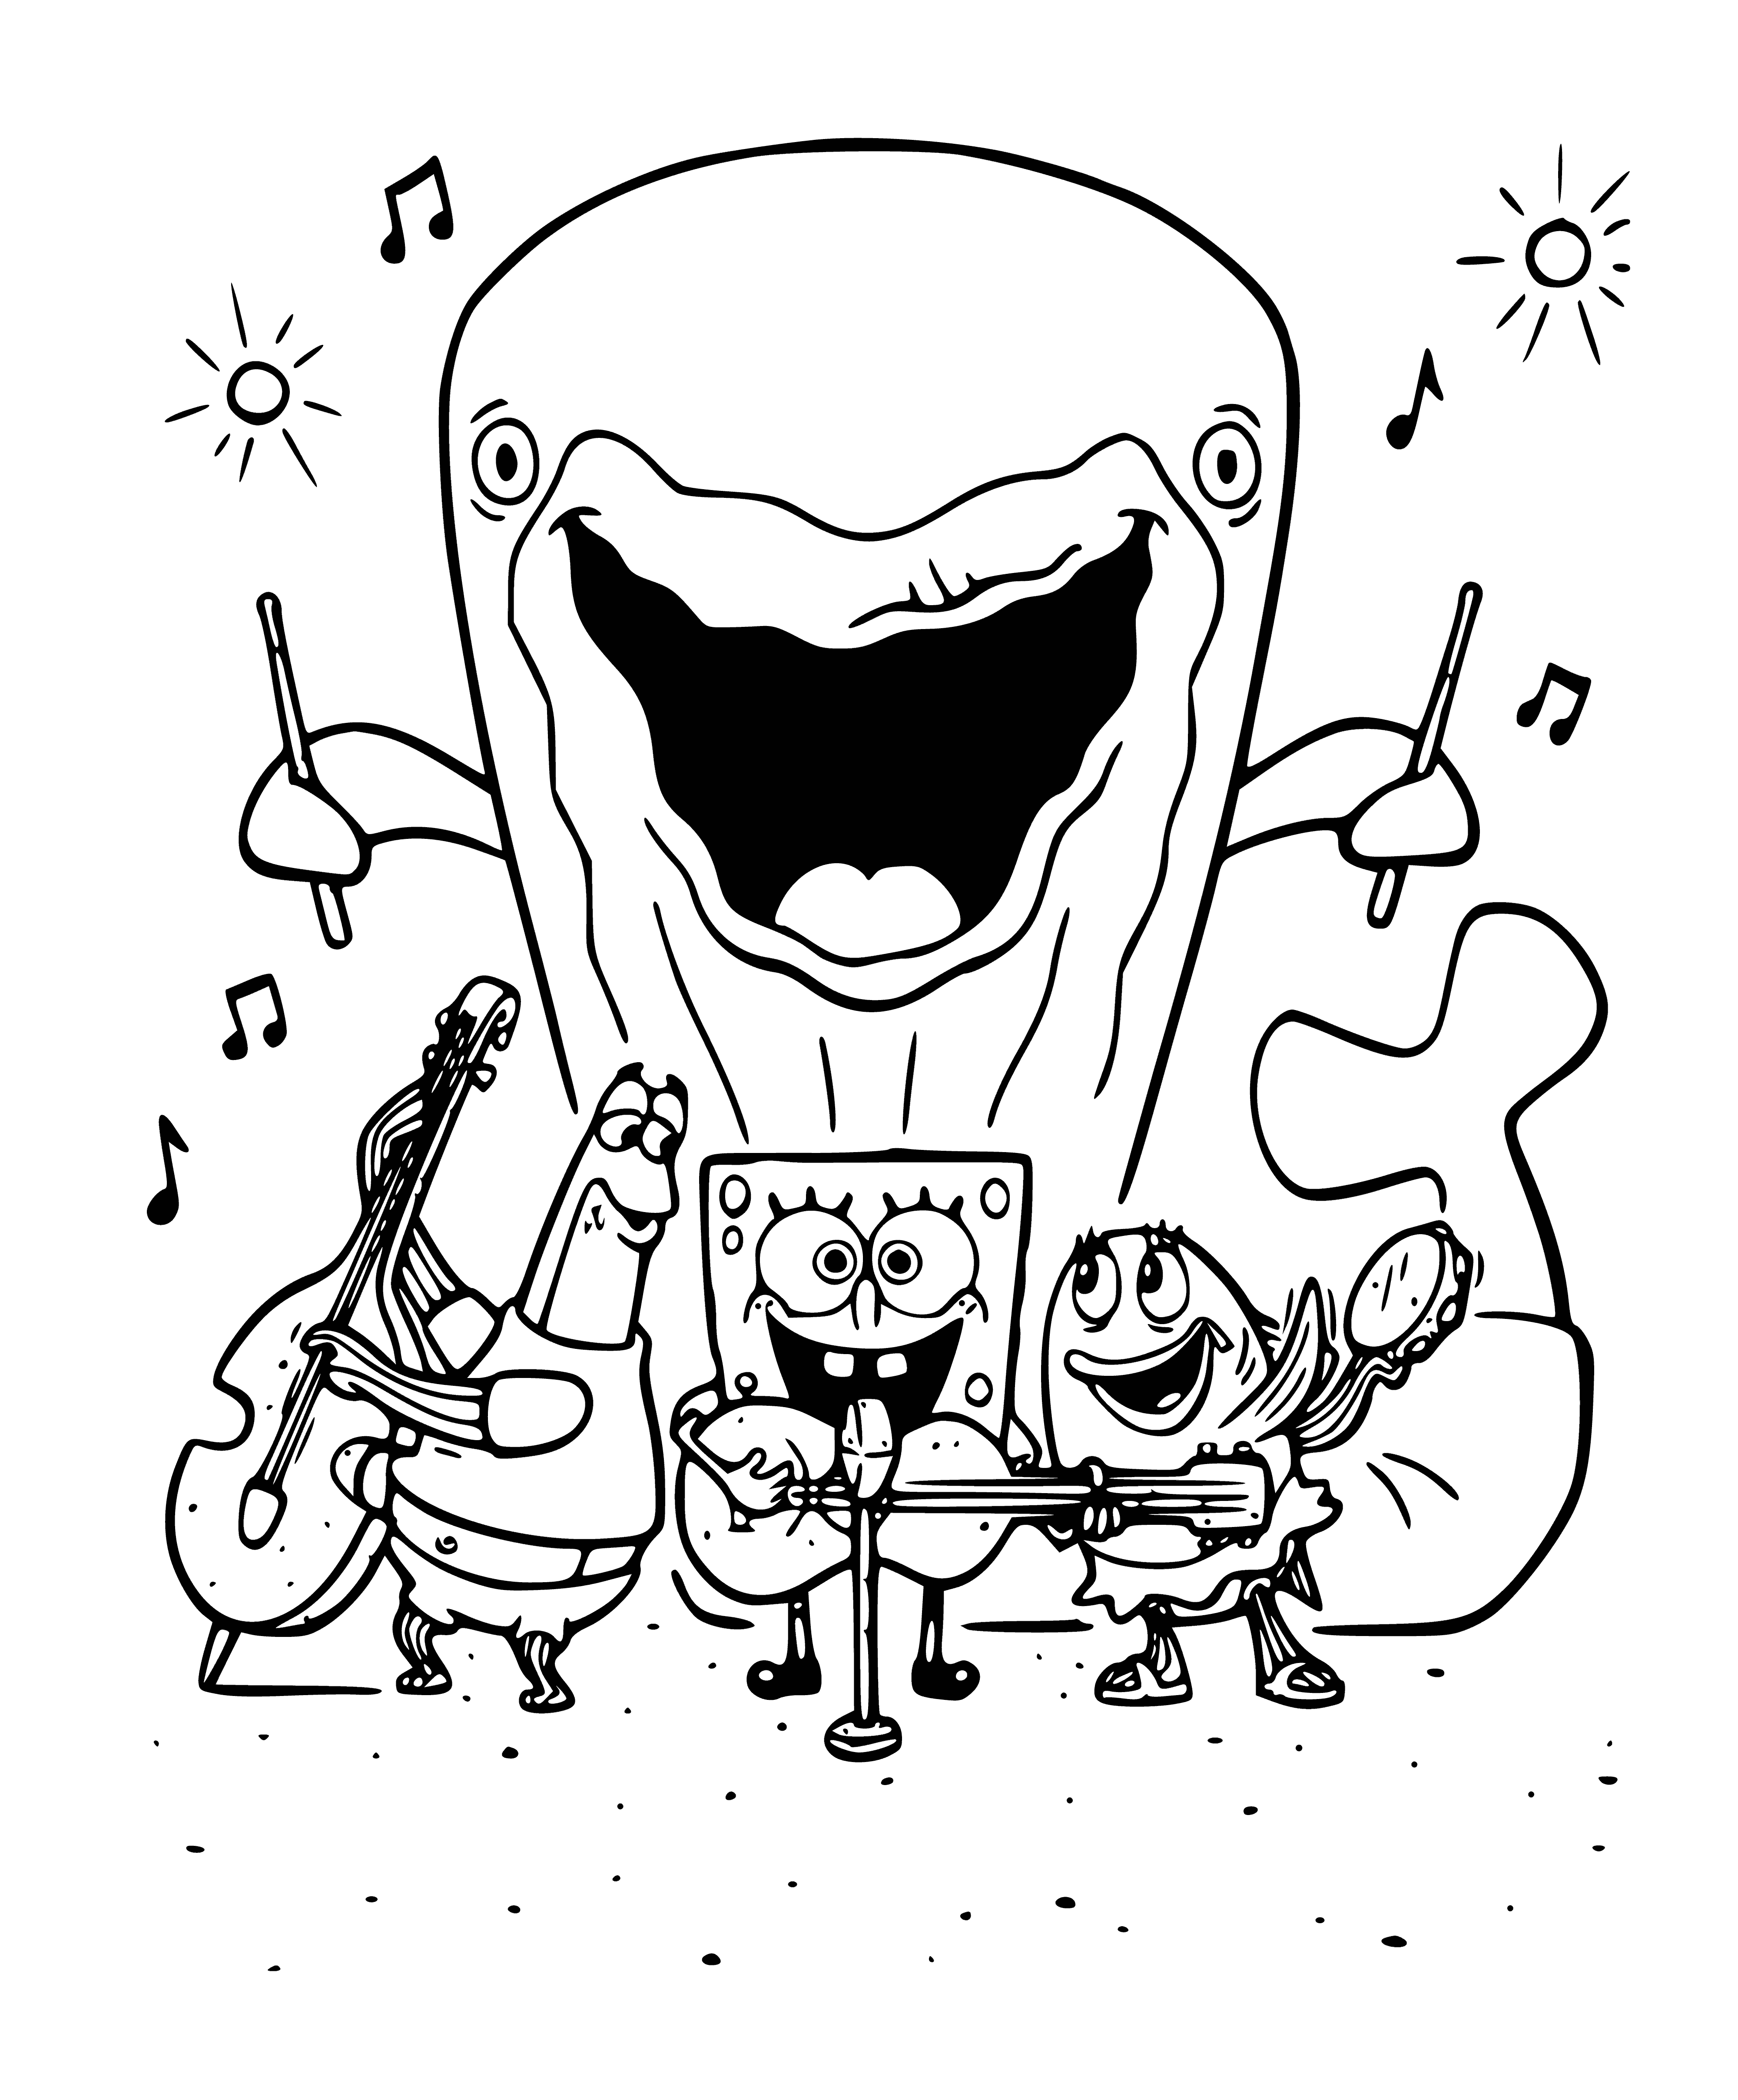 coloring page: The SpongeBob Squarepants Merry Quartet: electric guitar, drums, clarinet, bass; all in Santa hats, all very happy!